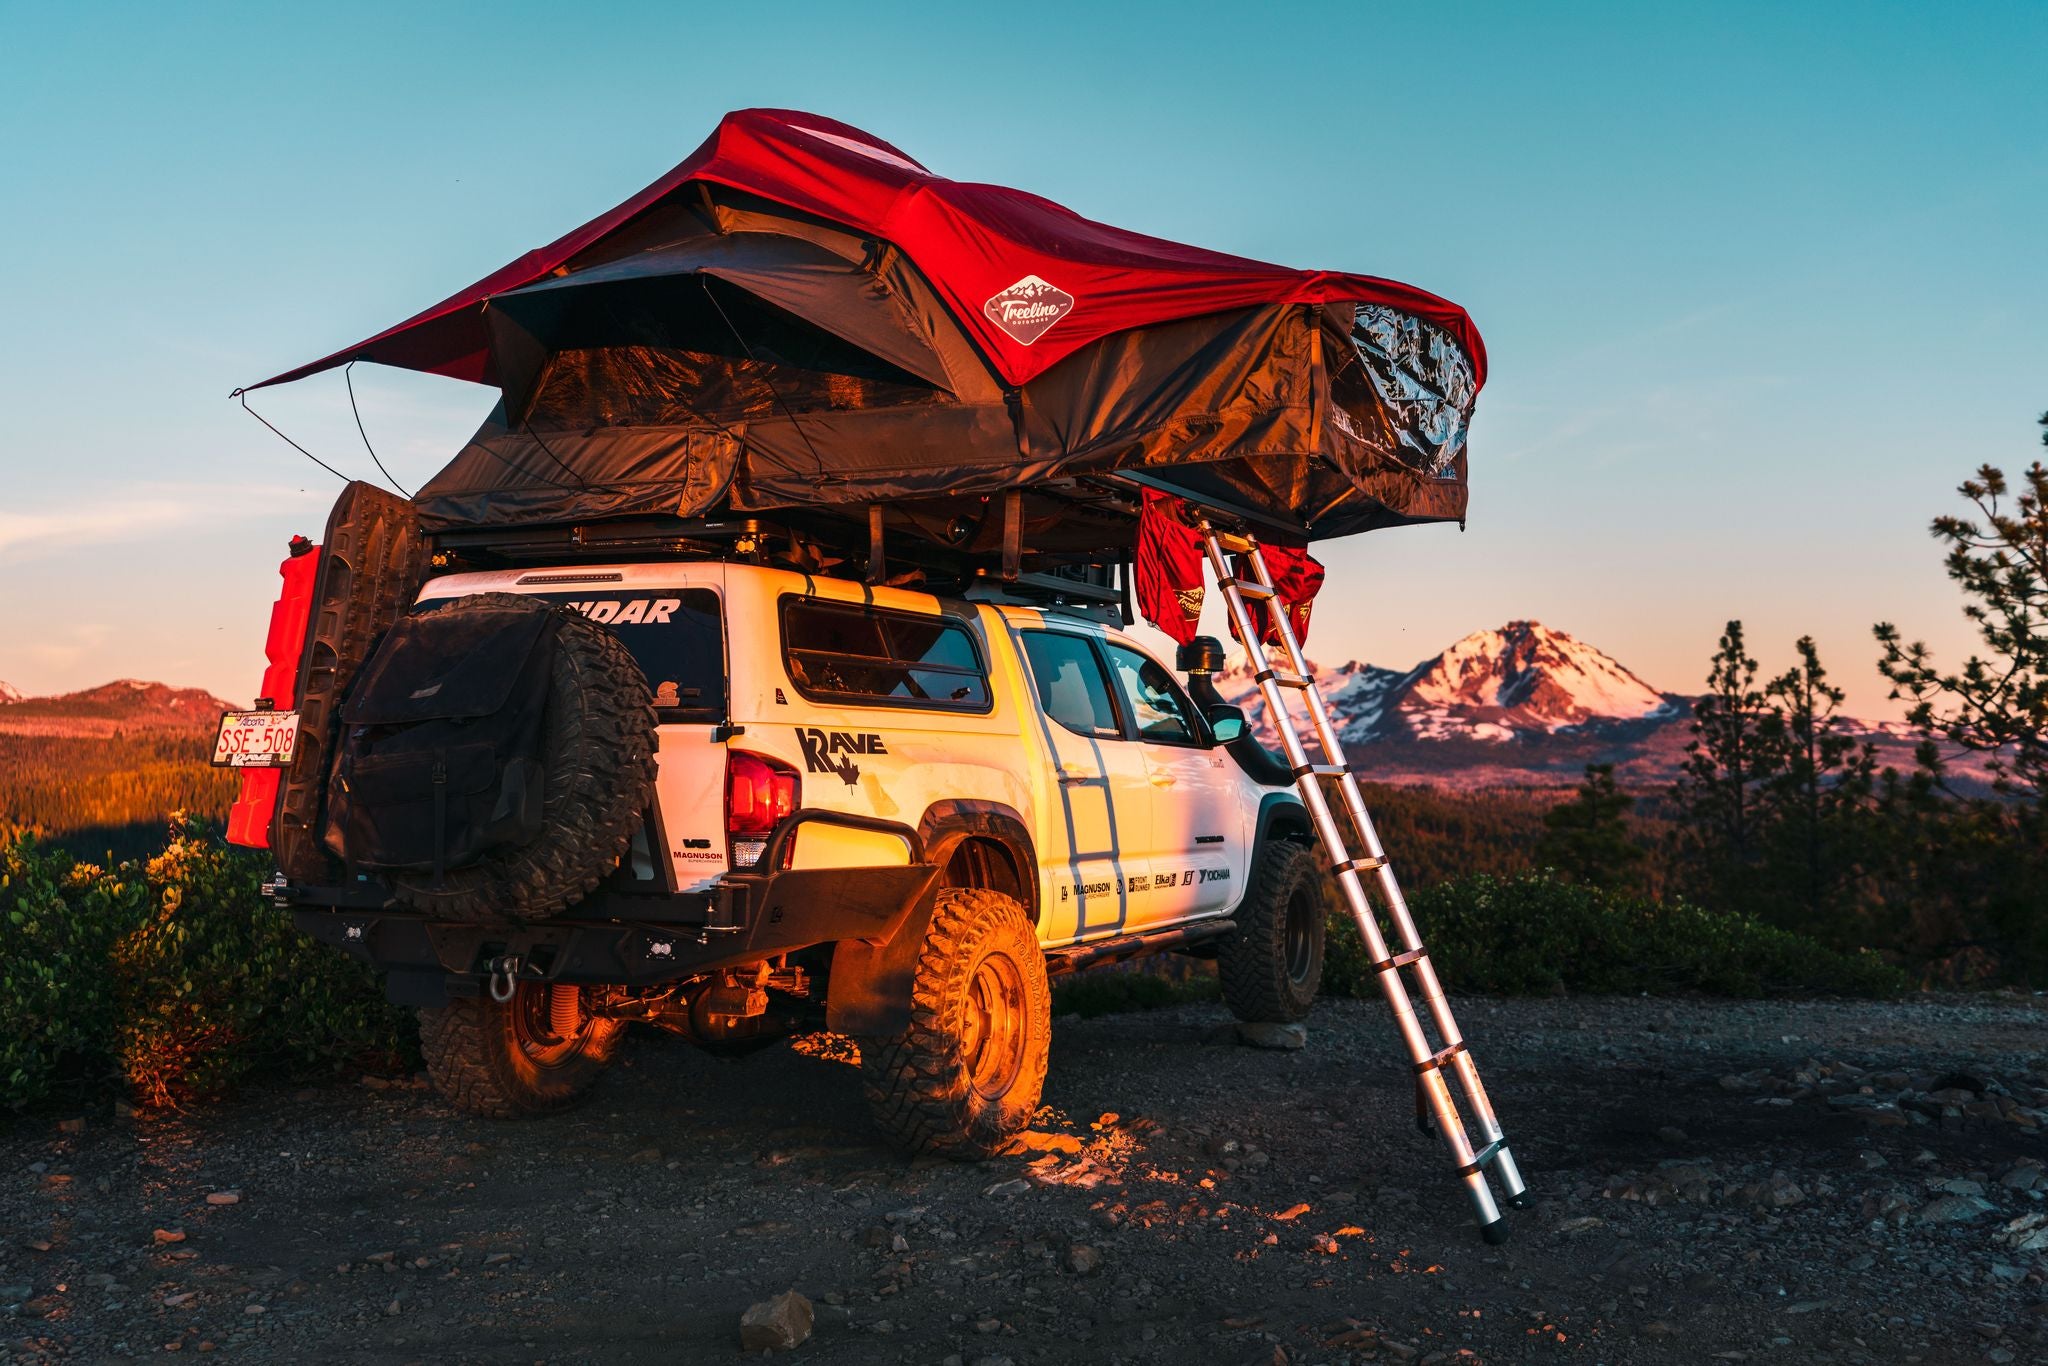 Simple & Reliable Rooftop Tents - Treeline Outdoors